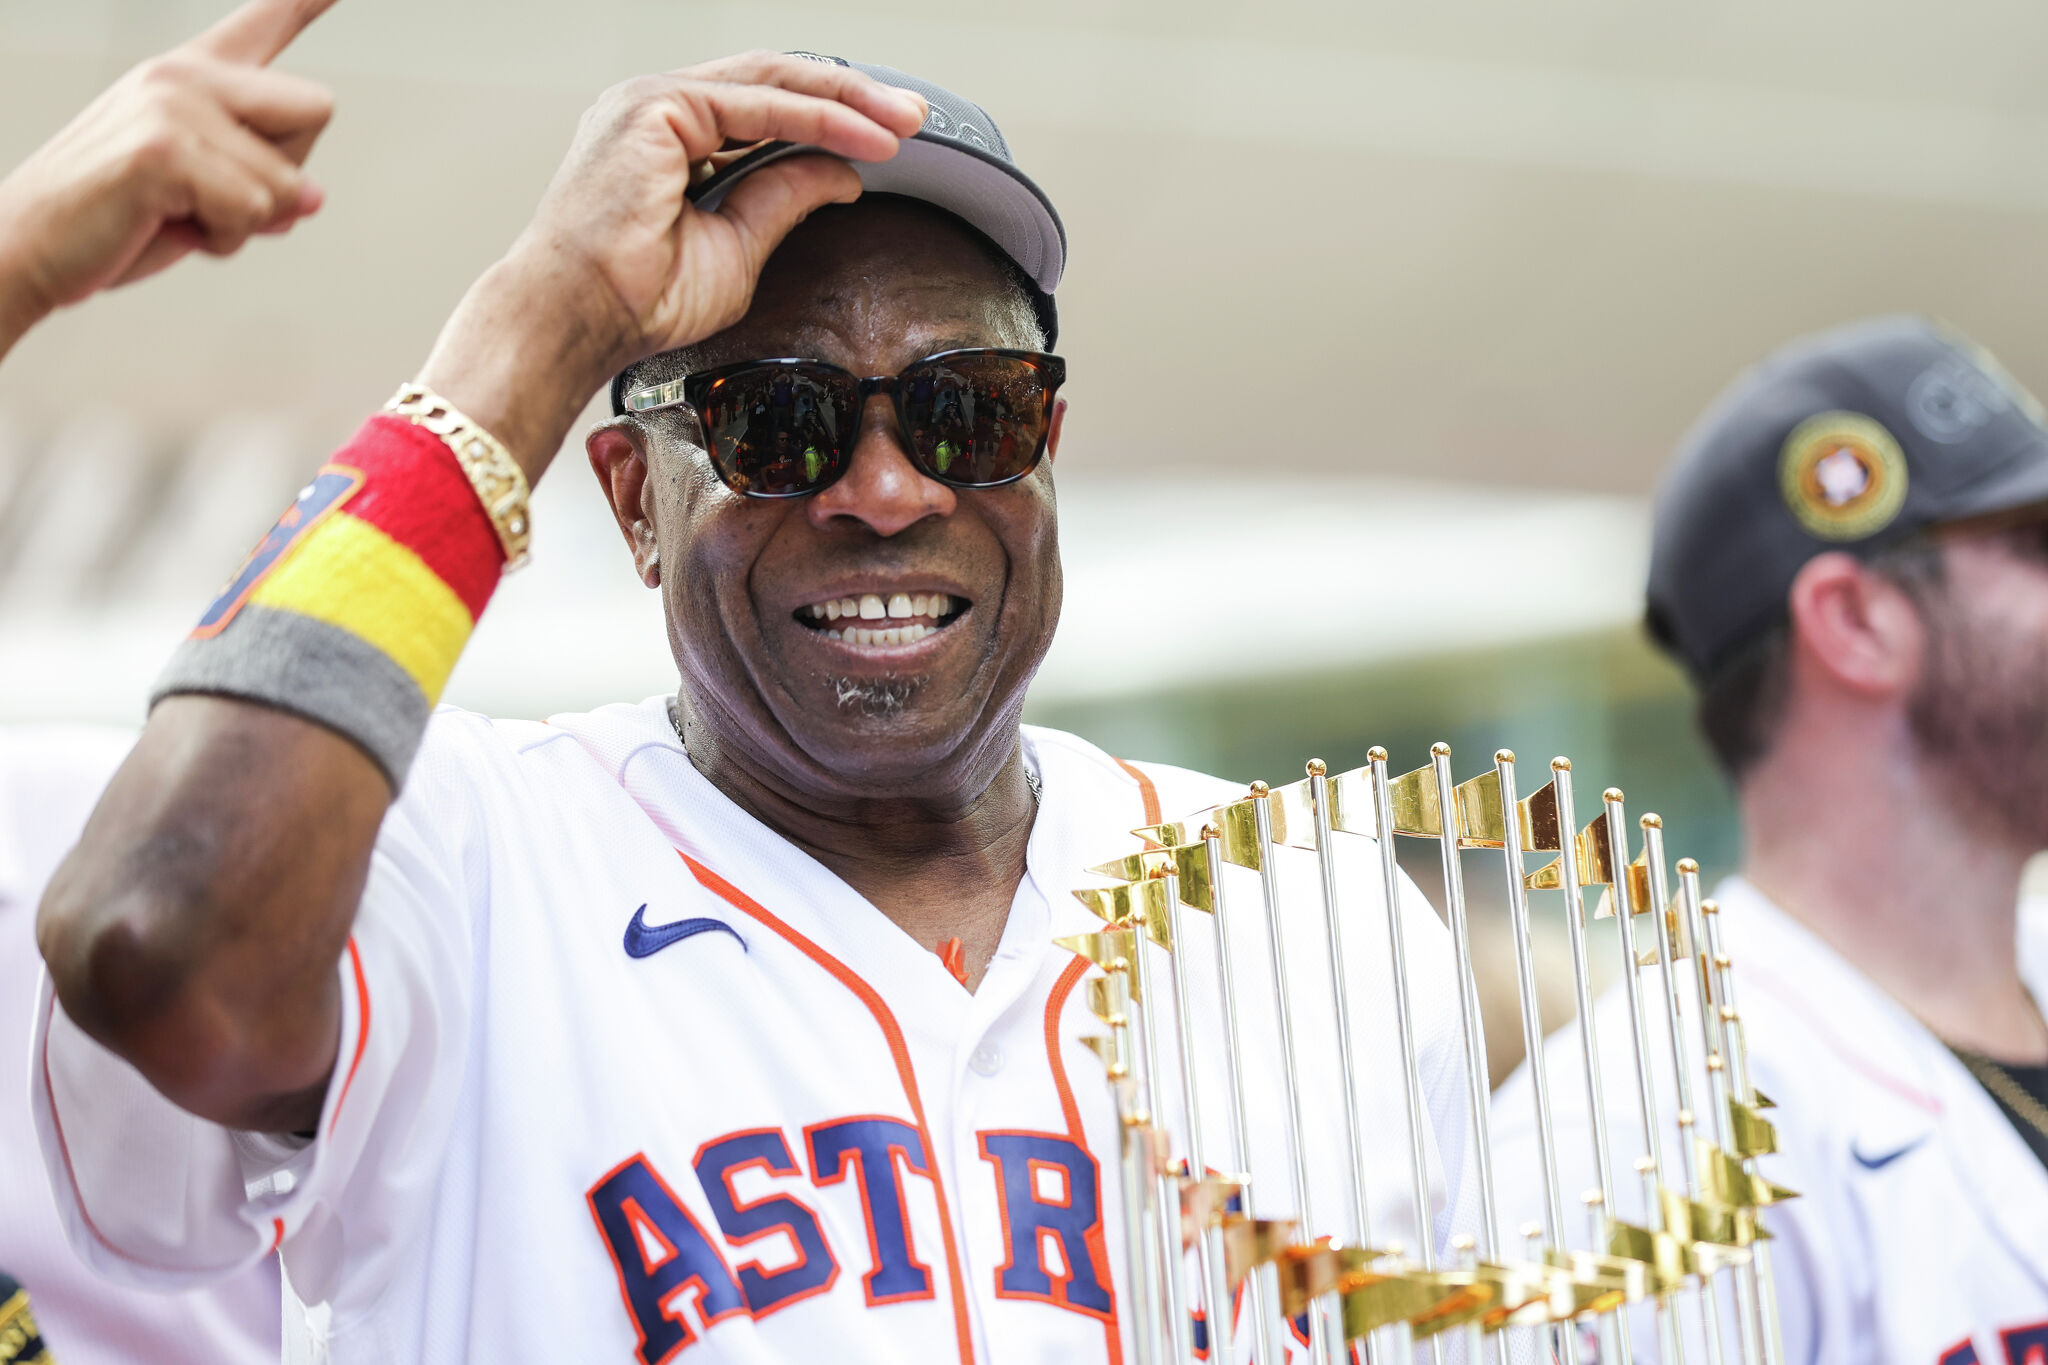 Dusty Baker says he will return to Astros for 2023 season